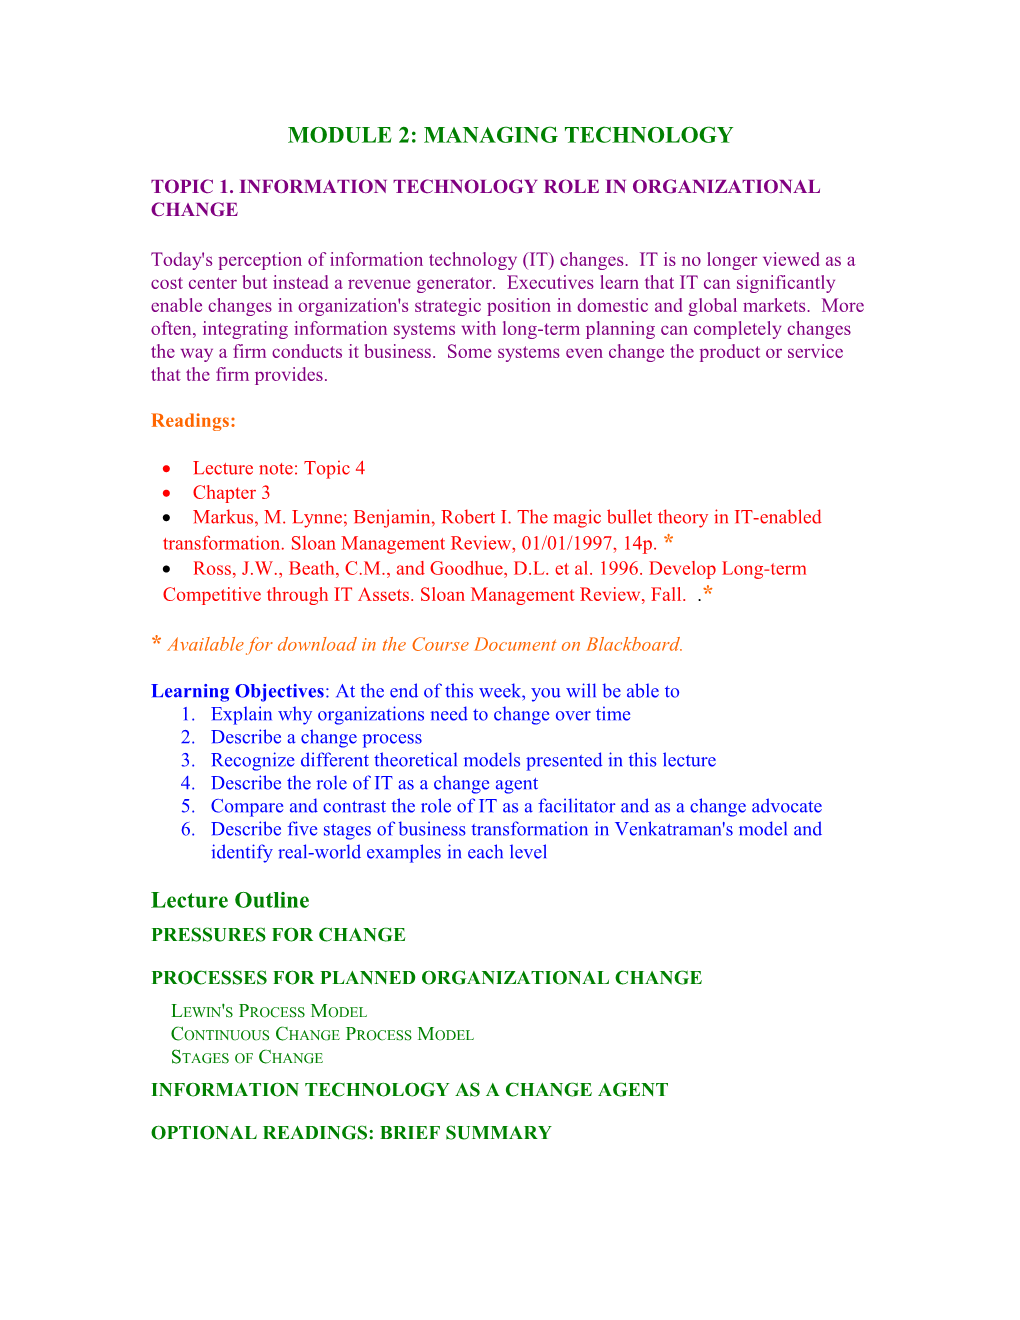 Topic 1. Information Technology Role in Organizational Change